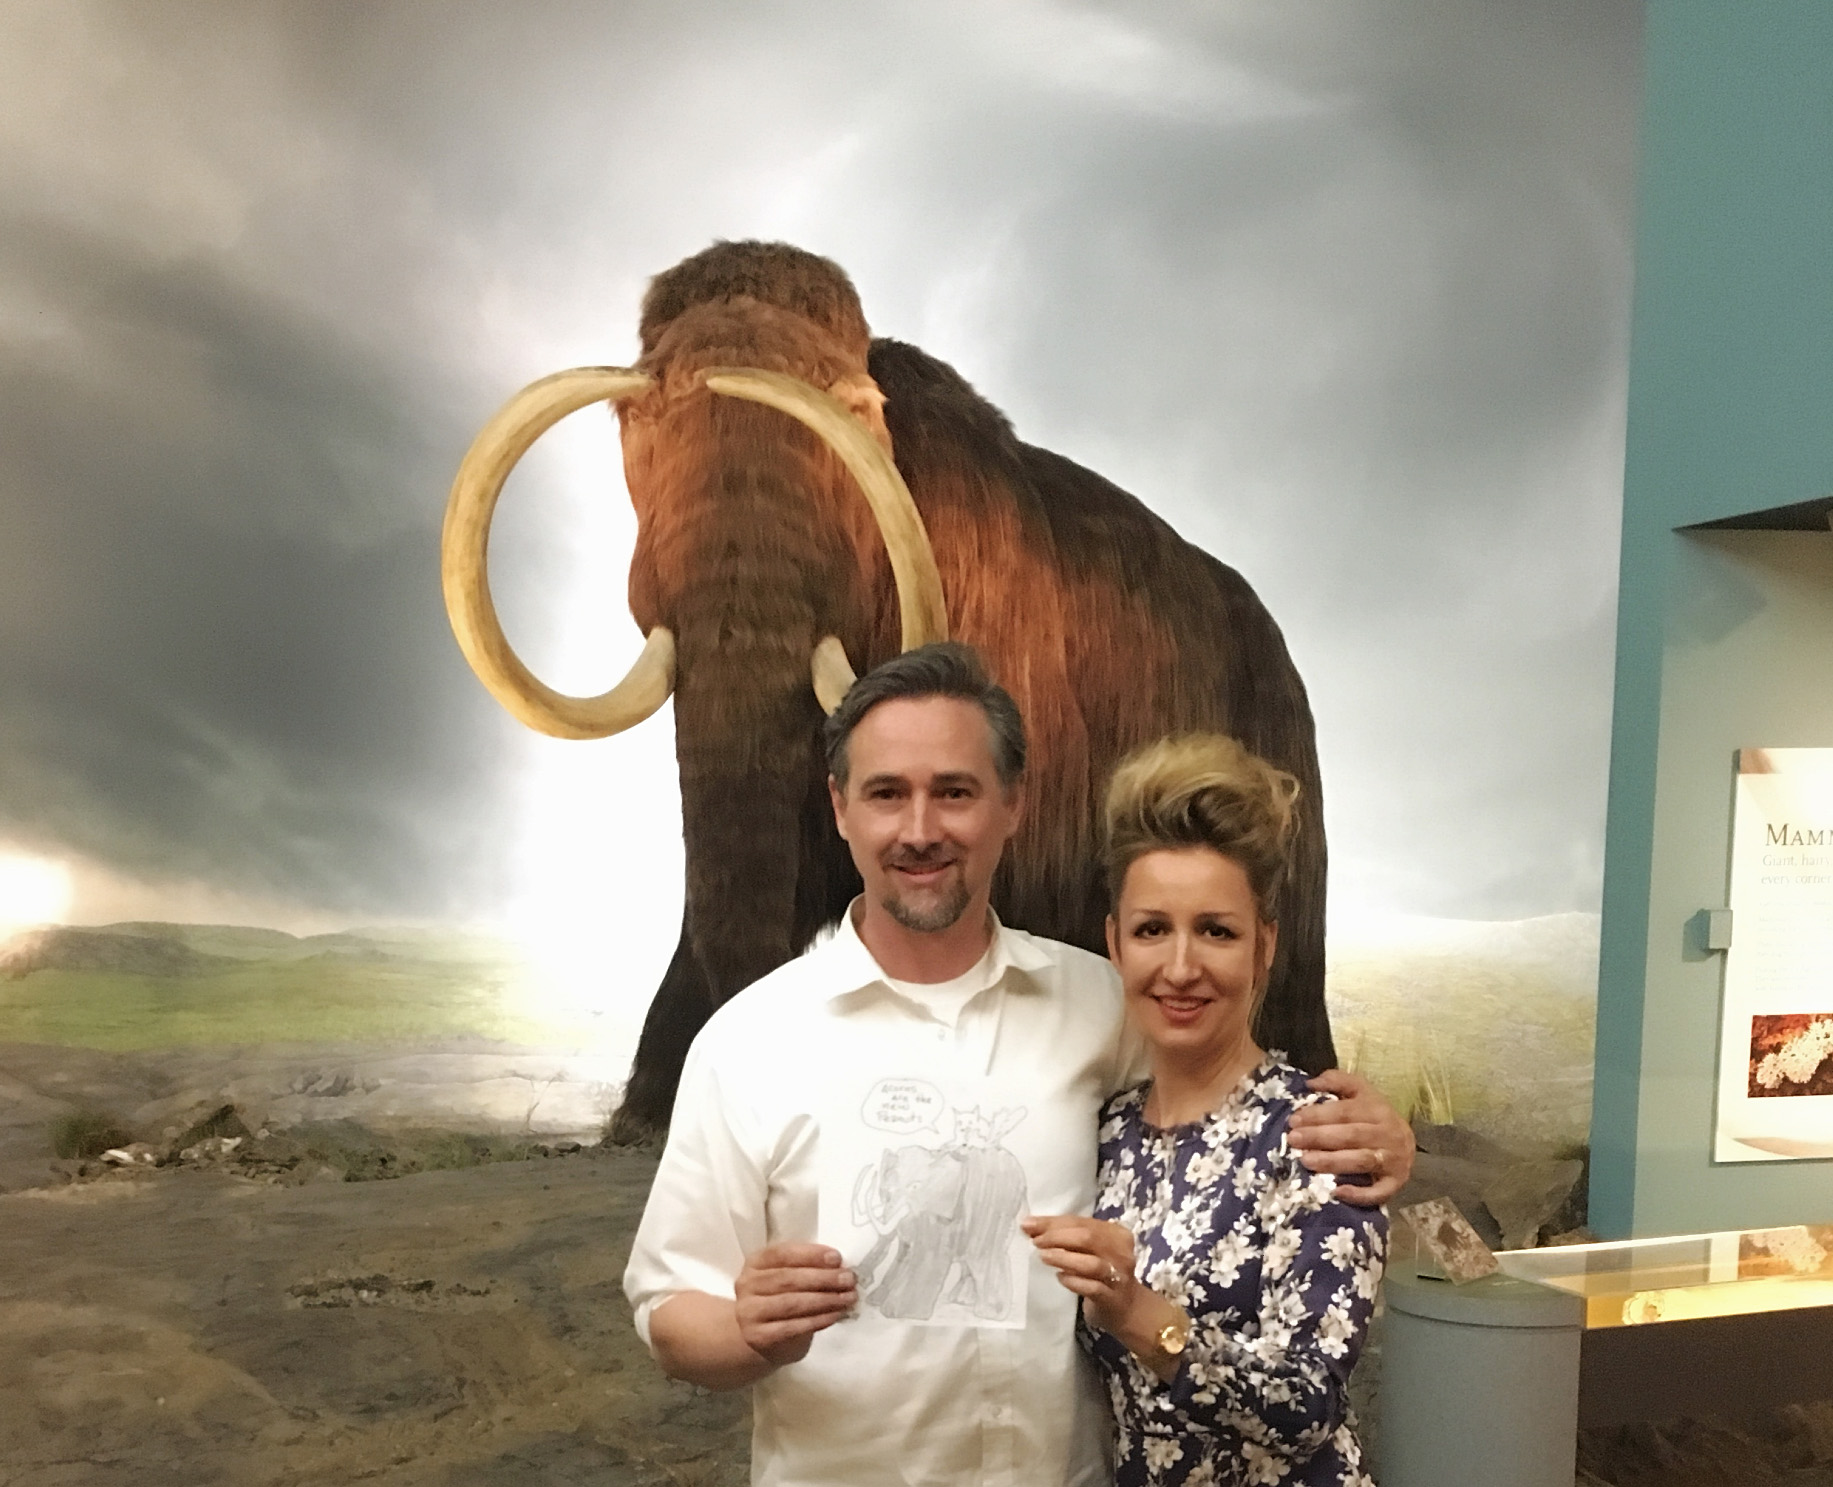 Gareth Gaudin and Carollyne Yardley in front of Woolly Mammoth at RBCM, July 2017 